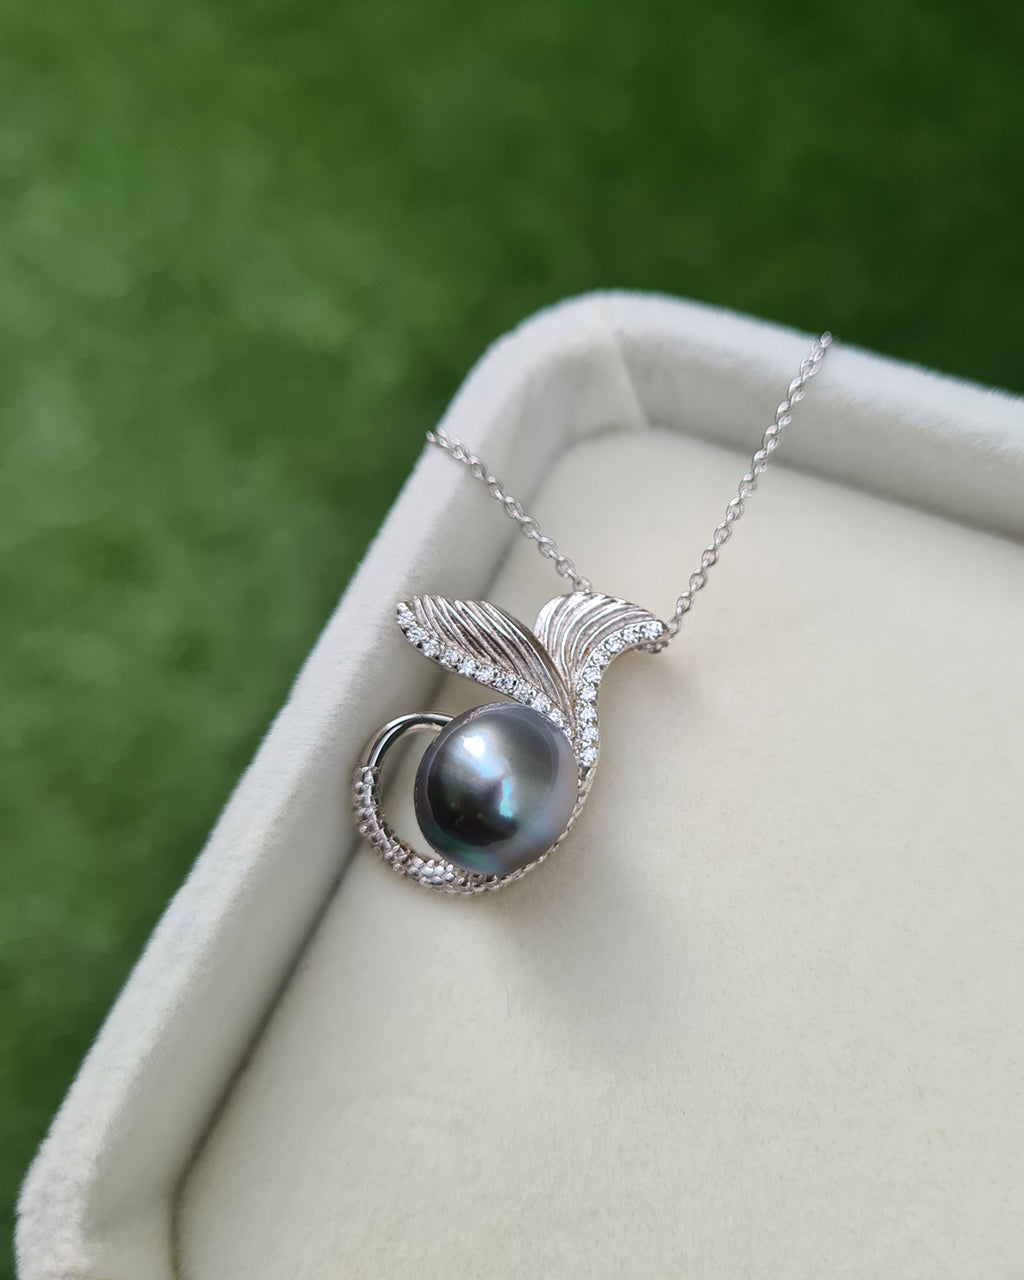 Tahitian Pearl Necklace - Mermaid Tail Sterling Silver Pearl Pendant Necklace